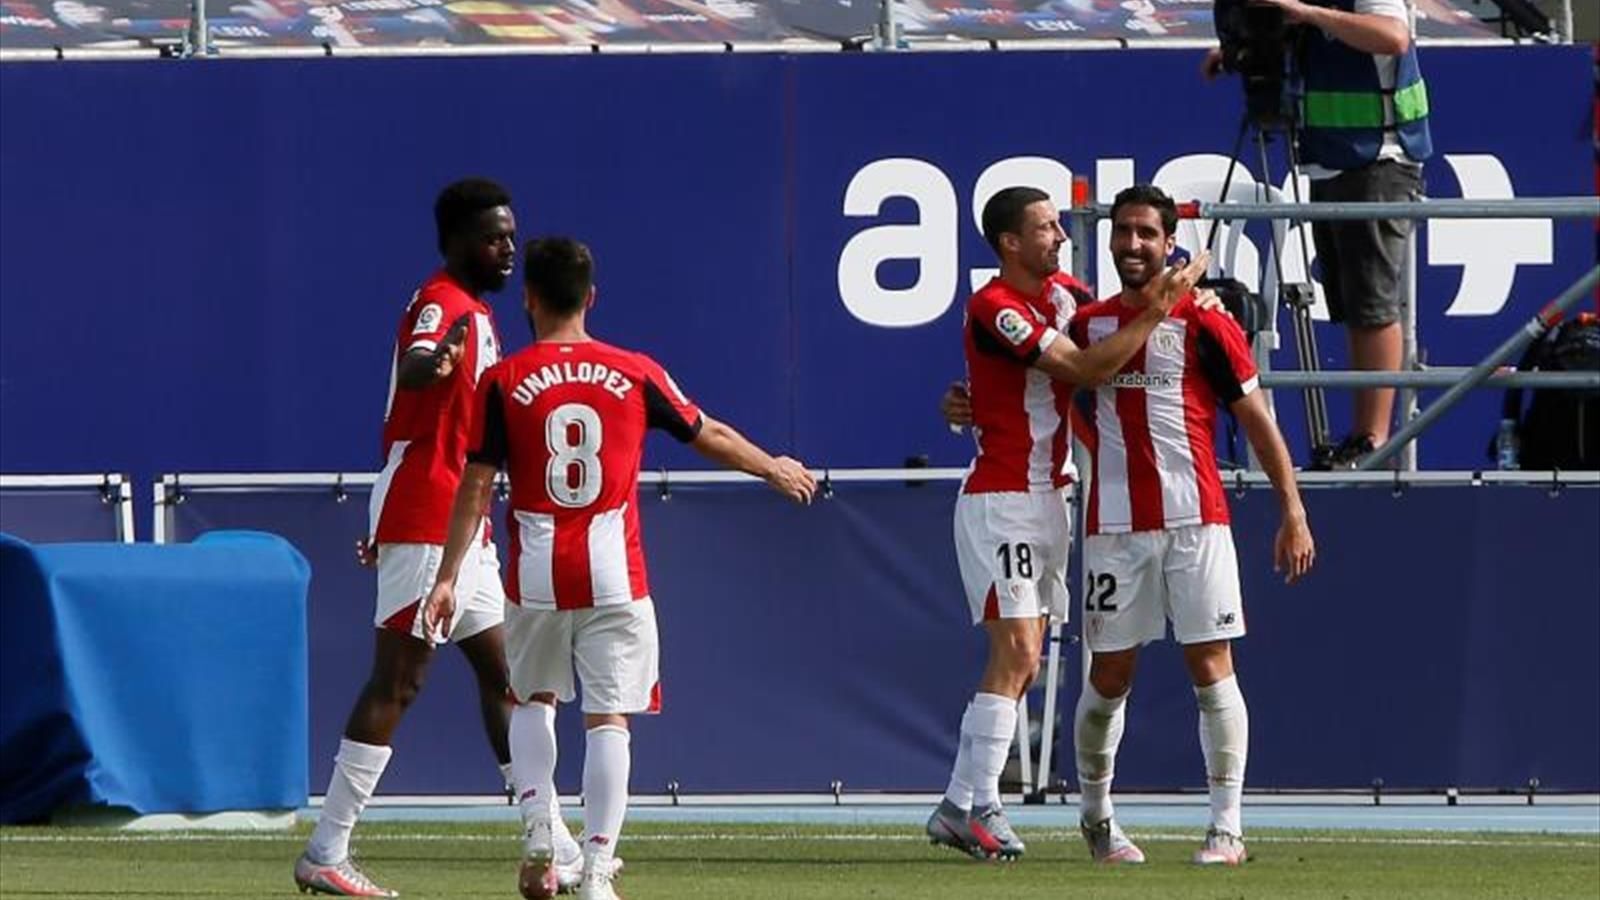 Athletic Bilbao Wins 1-2 over Levante on the Able Shoulders of Raul Garcia